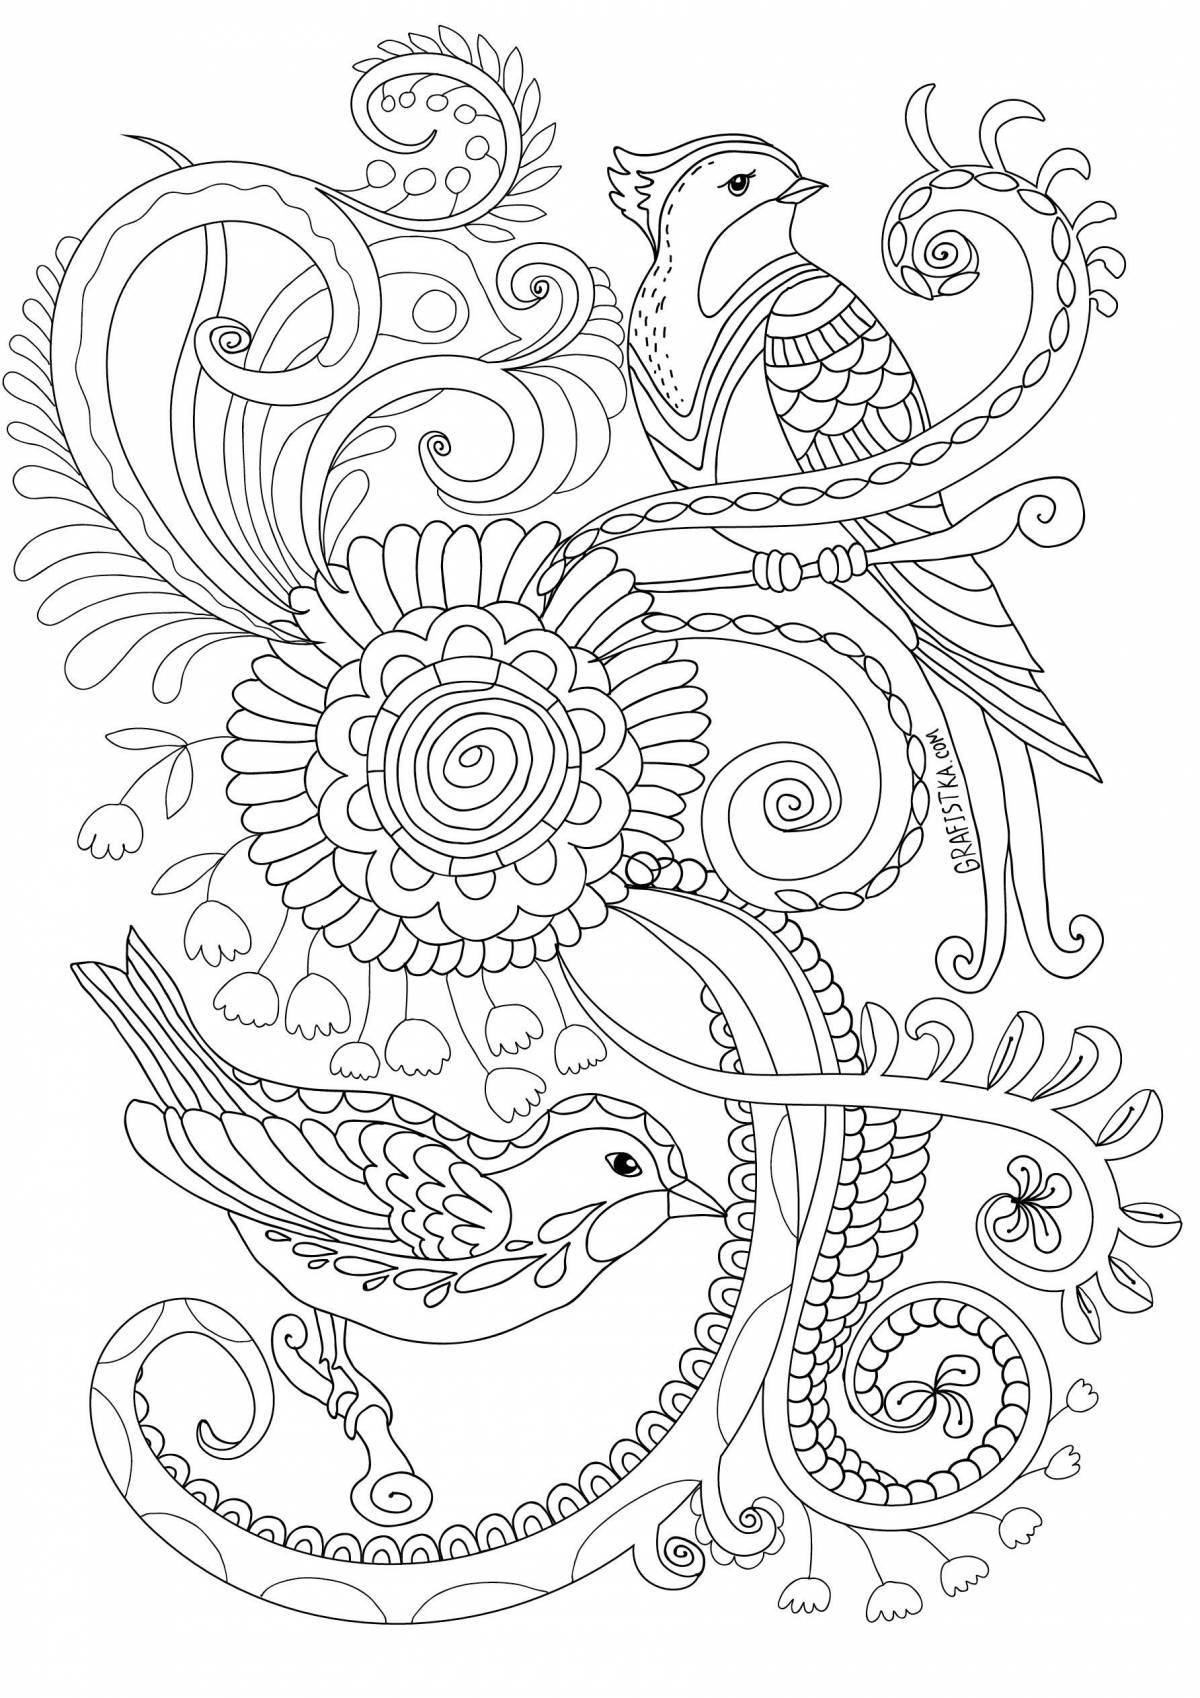 Calming coloring art therapy for adults